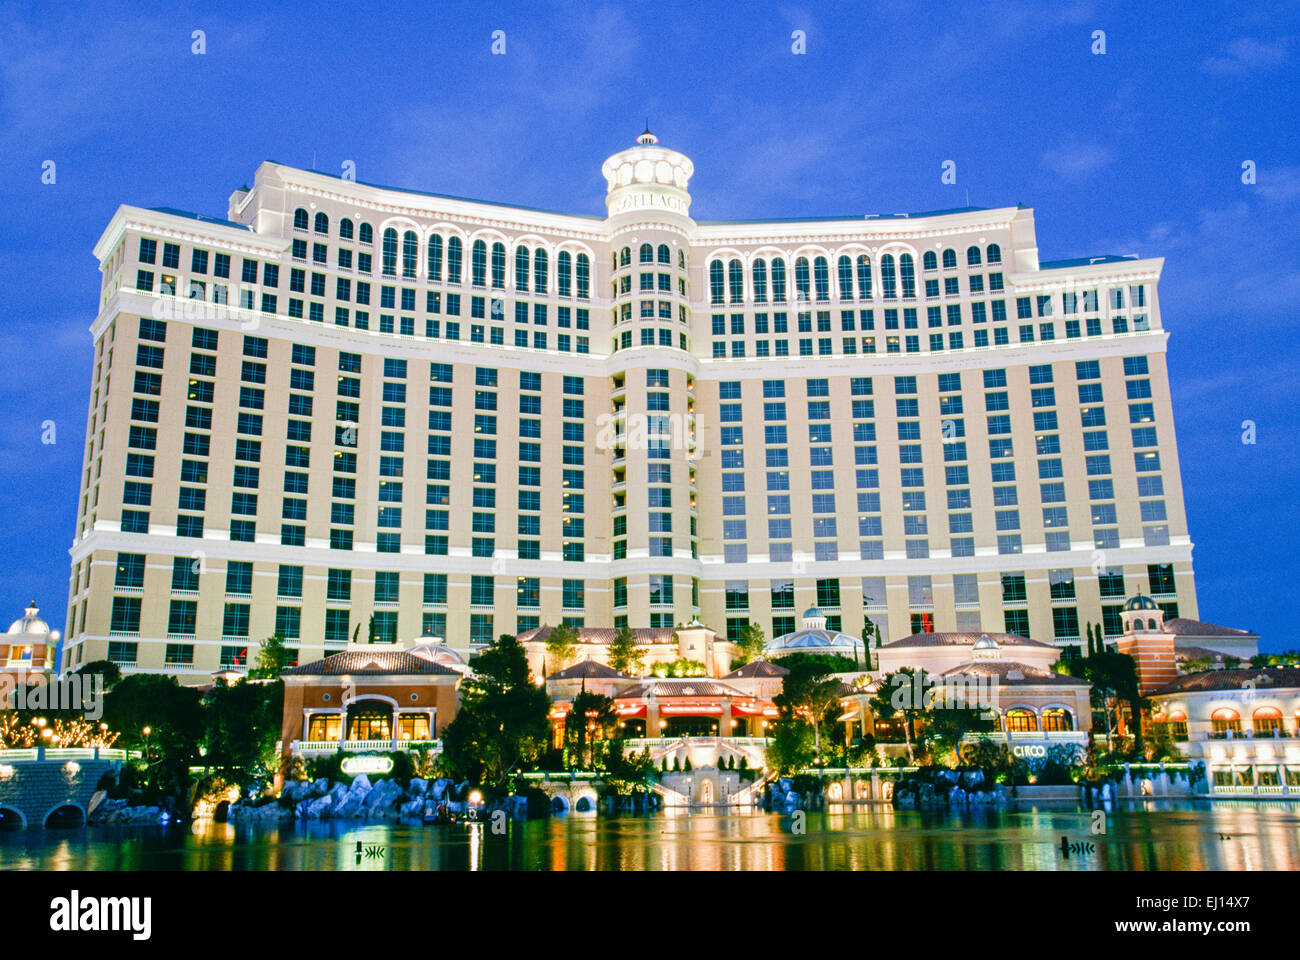 LAS VEGAS, NV – OCTOBER 18: The Grand Opening of the Bellagio Hotel in Las Vegas, Nevada on October 18, 1998. Stock Photo